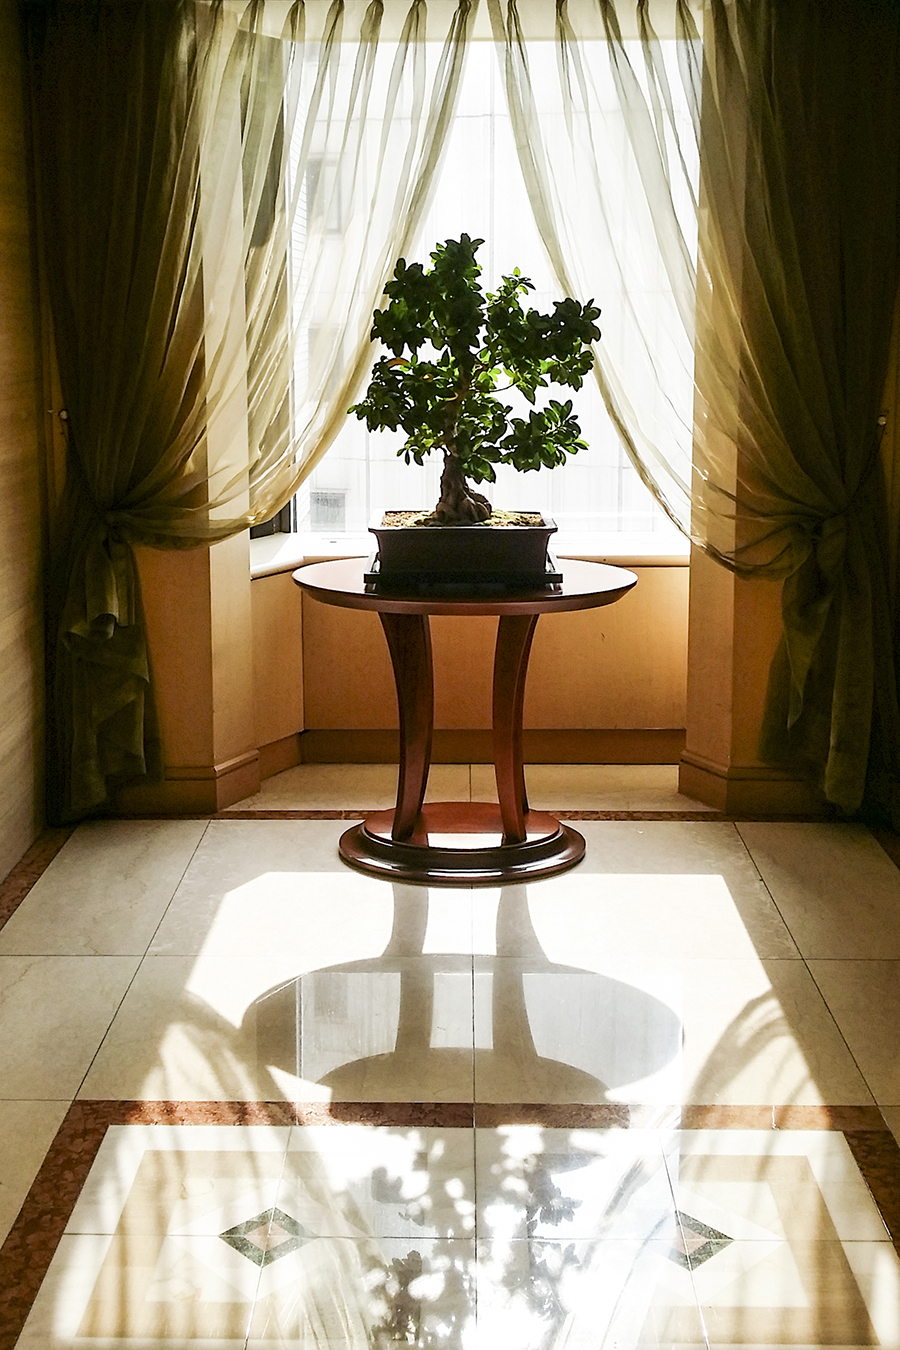 Morning light through a potted plant at the Lotte Hotel, Myeongdong, Korea